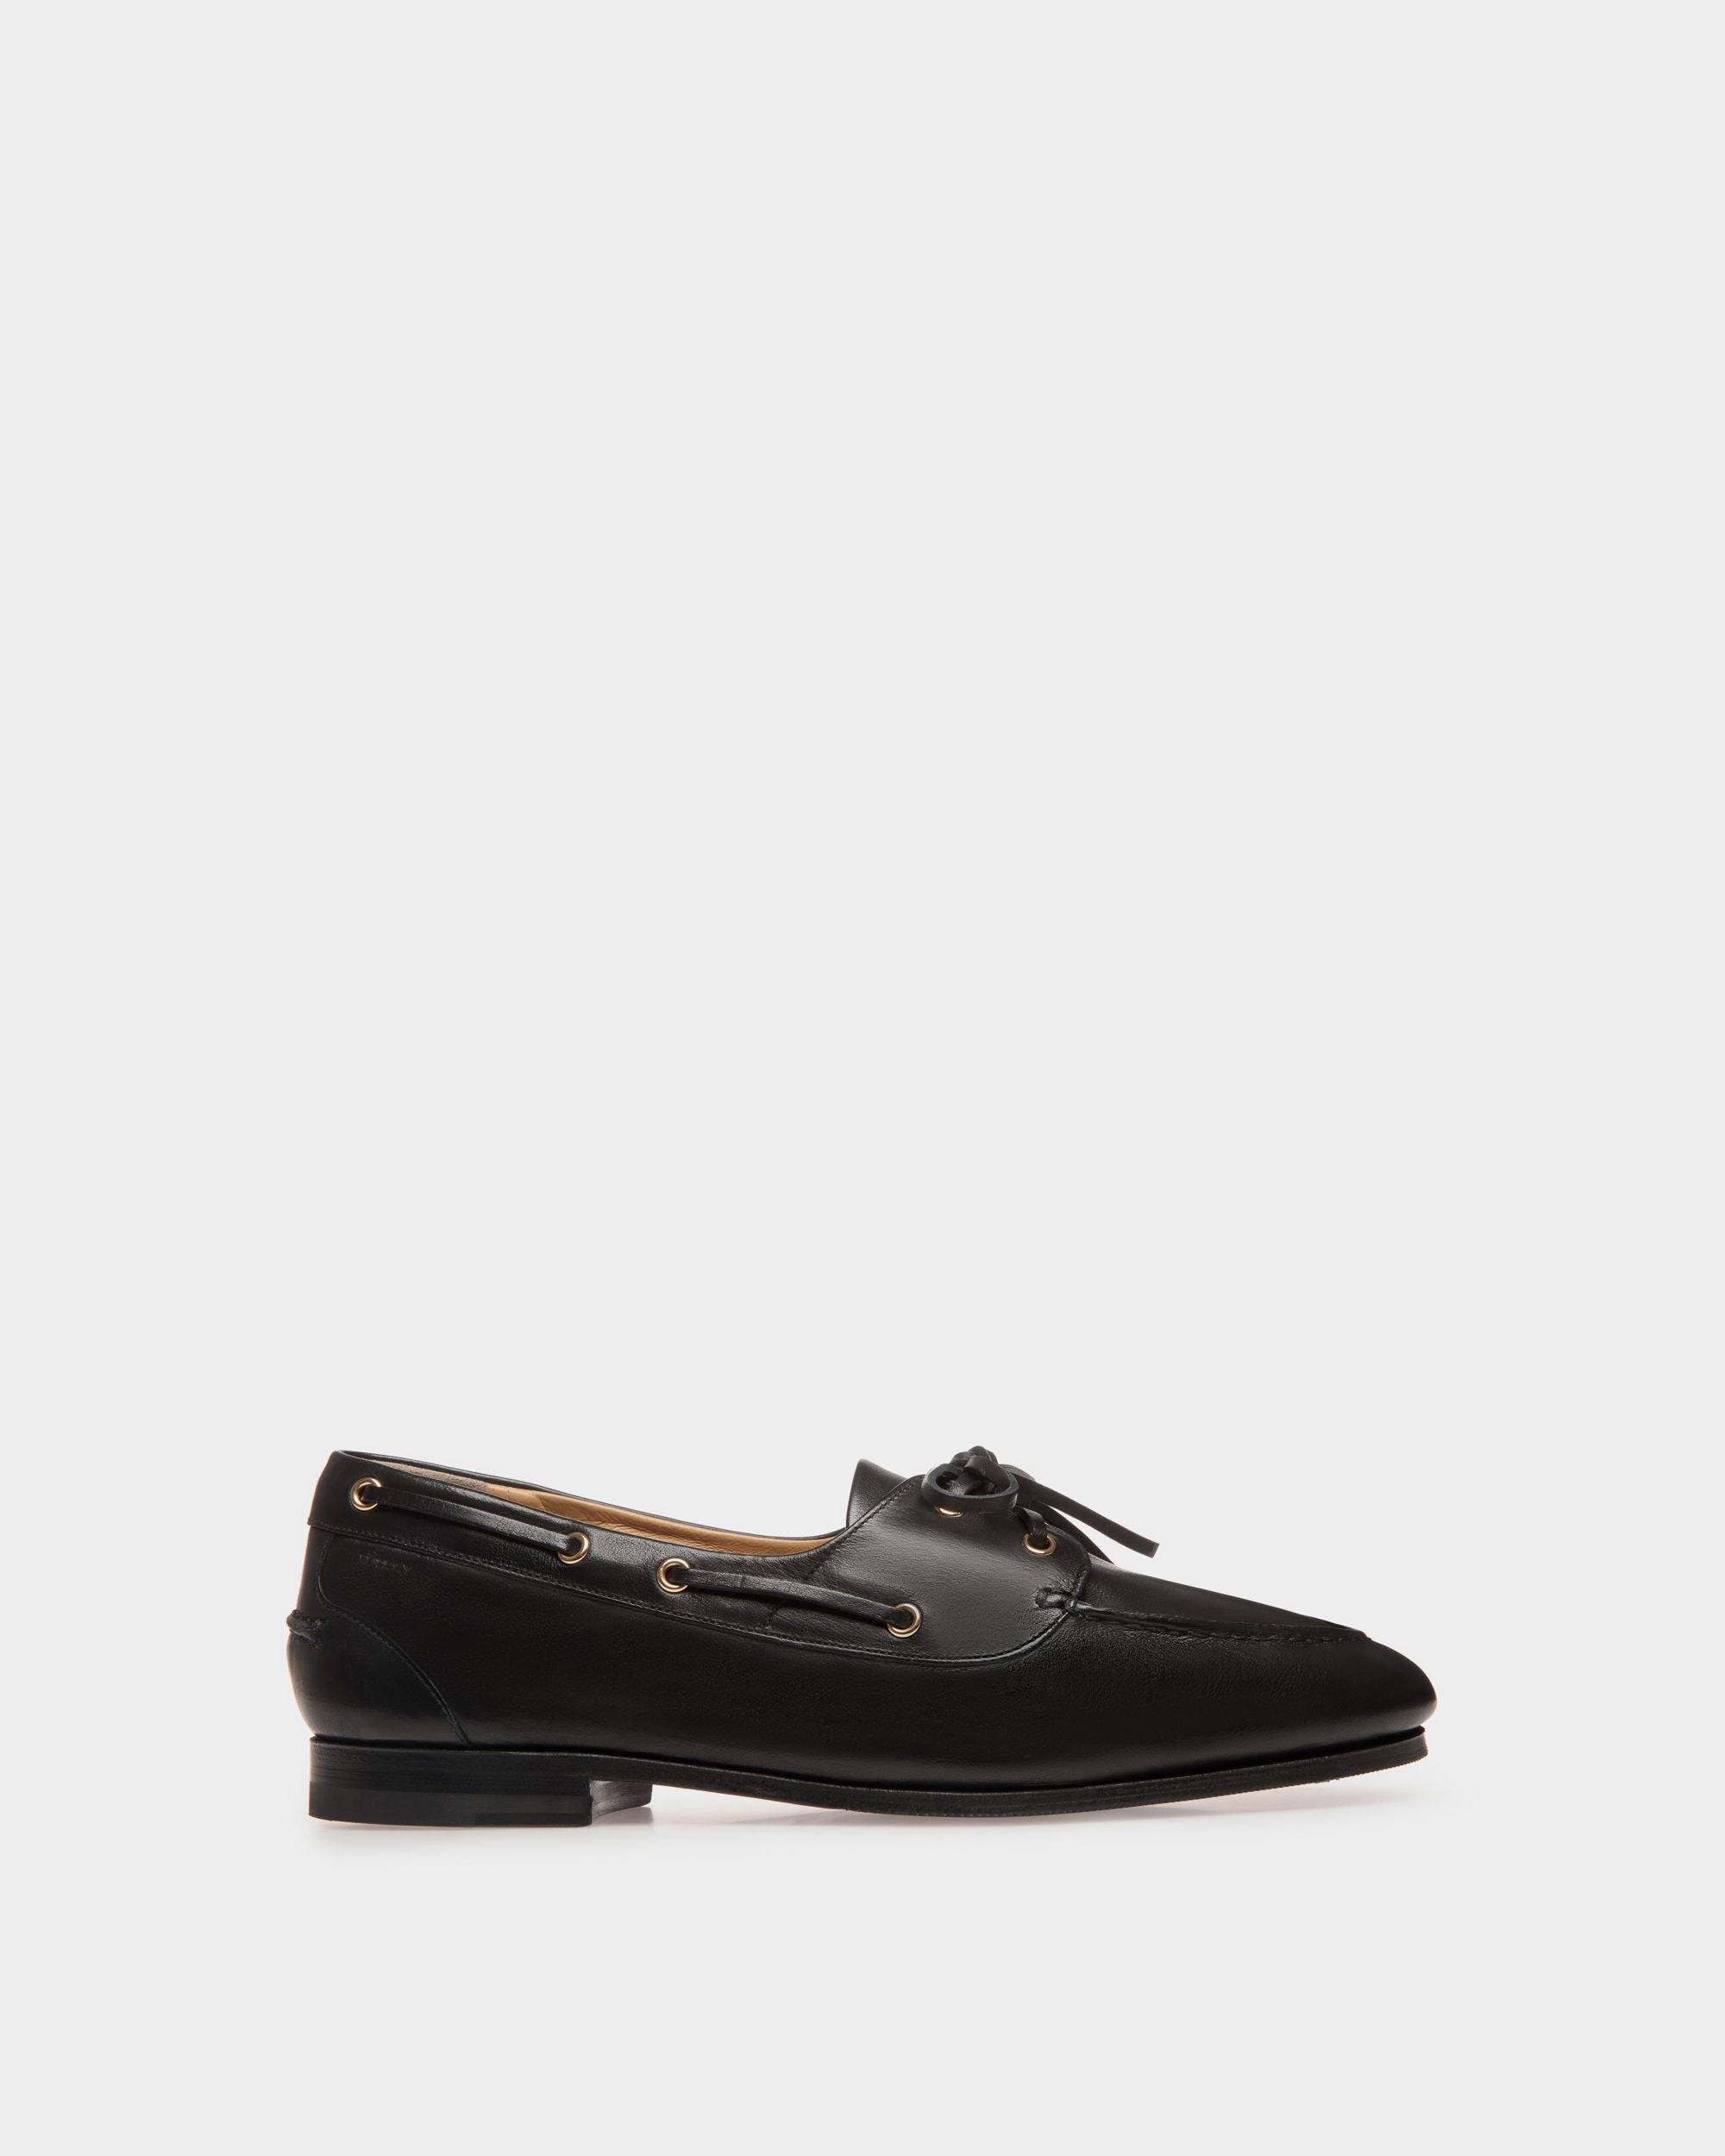 Men's Collection: Luxury Shoes, Clothing & Accessories | Bally